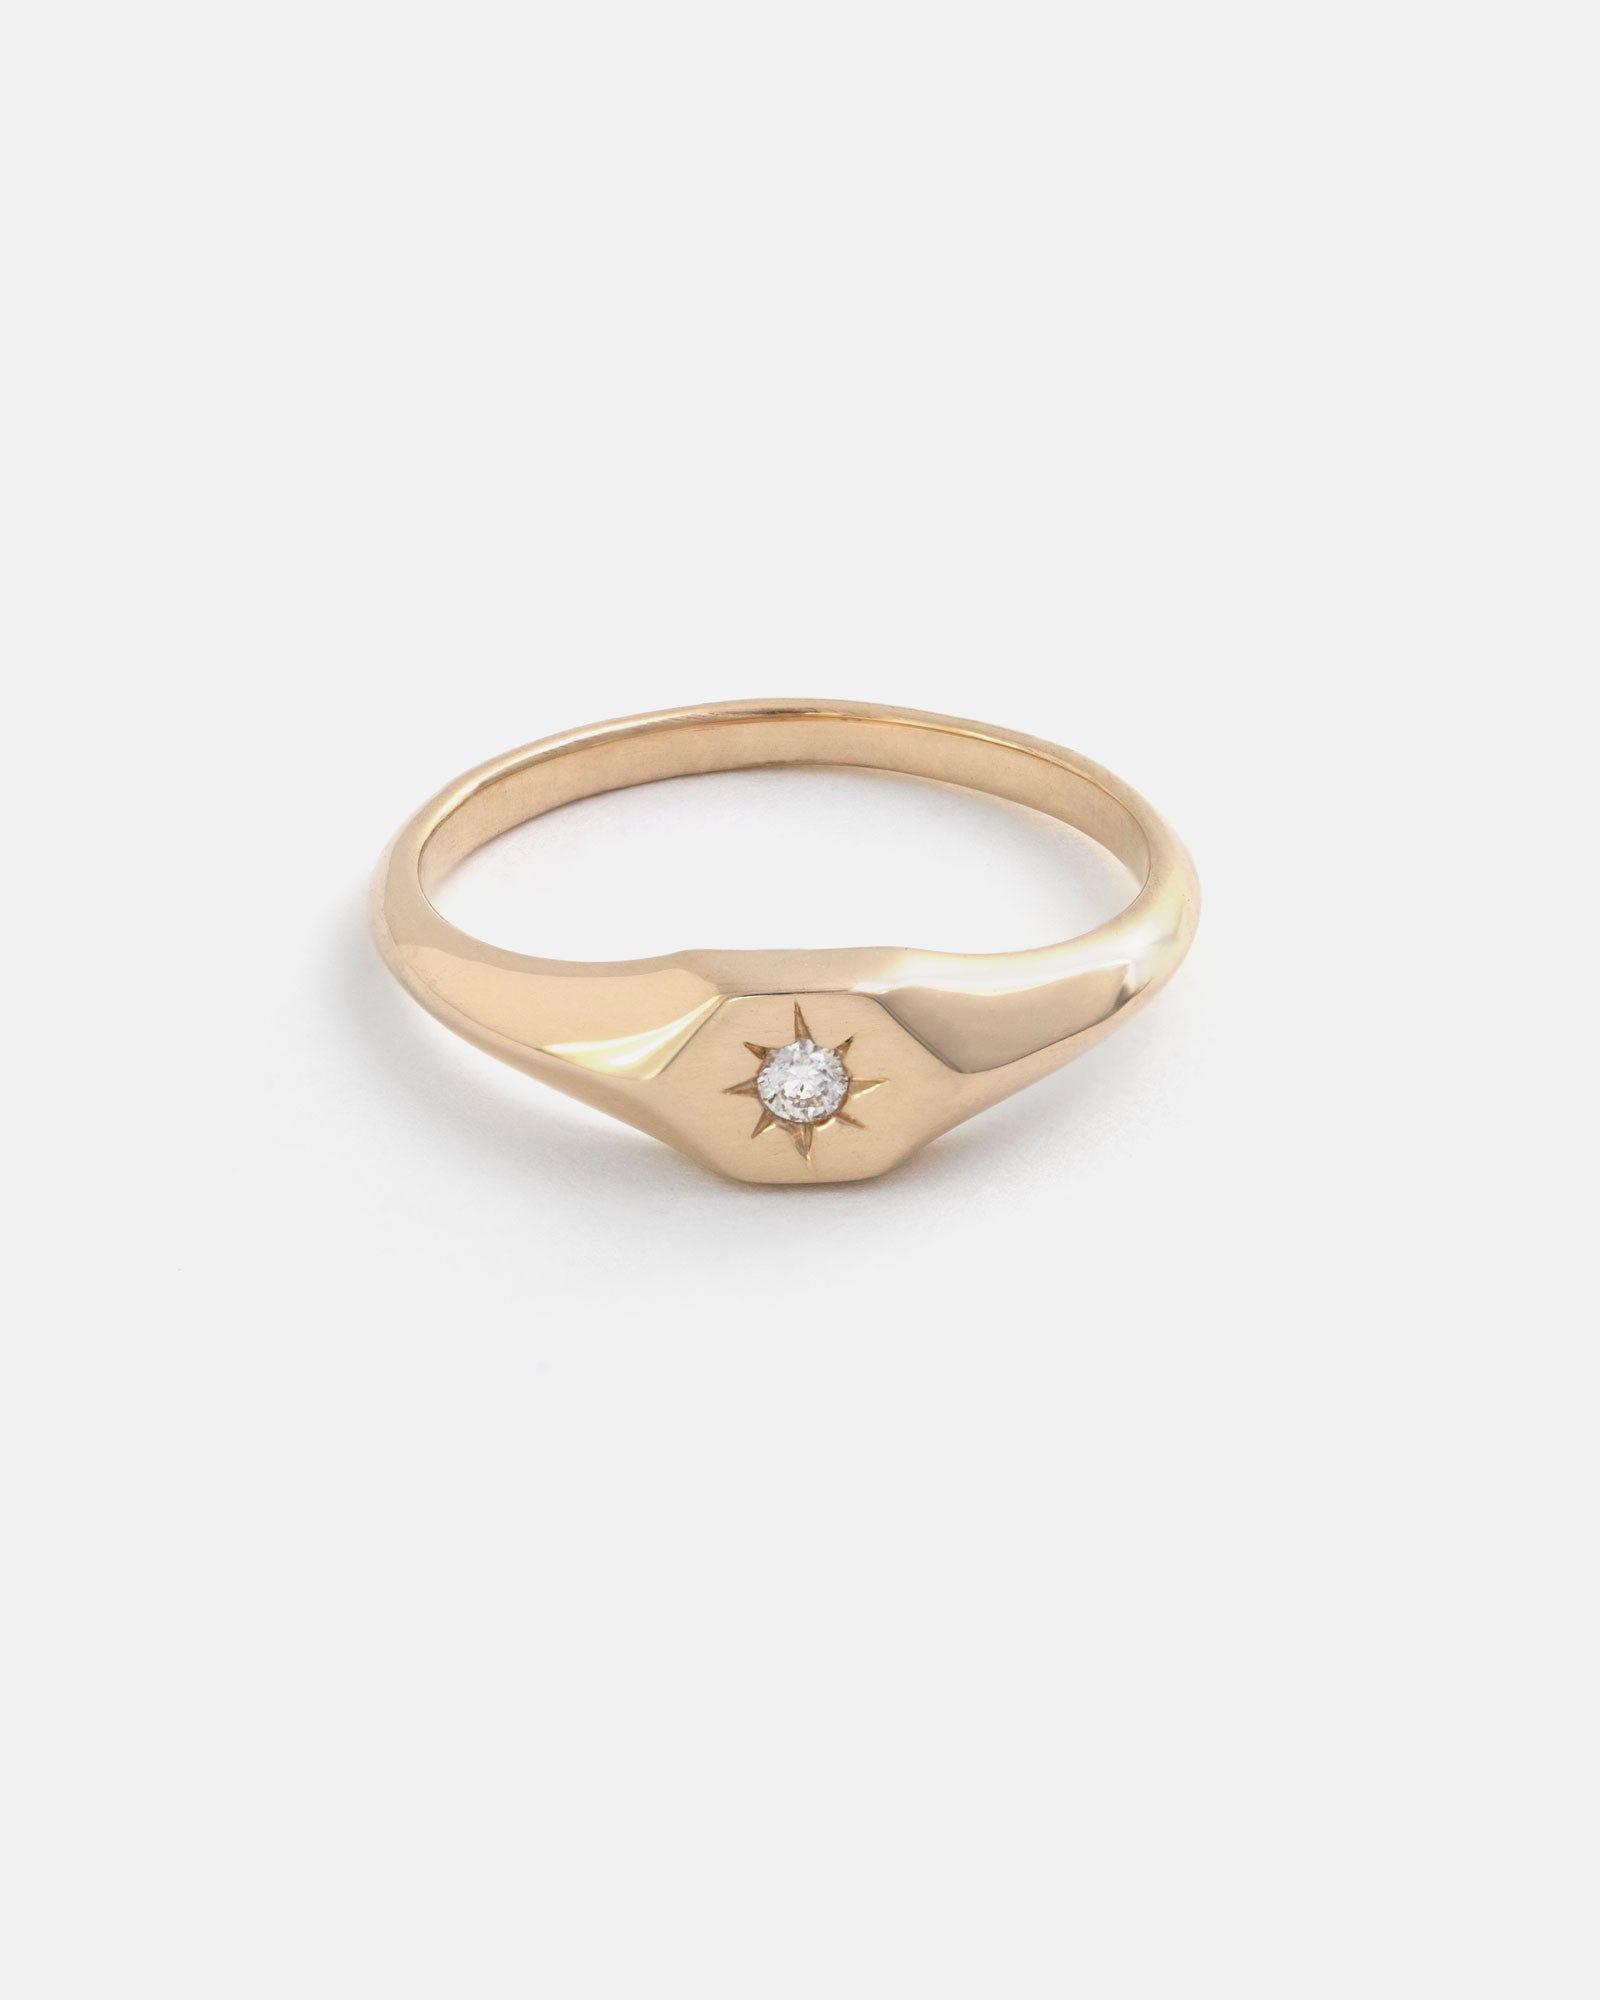 Astrale Ring in 14k Yellow Gold | MYEL Design